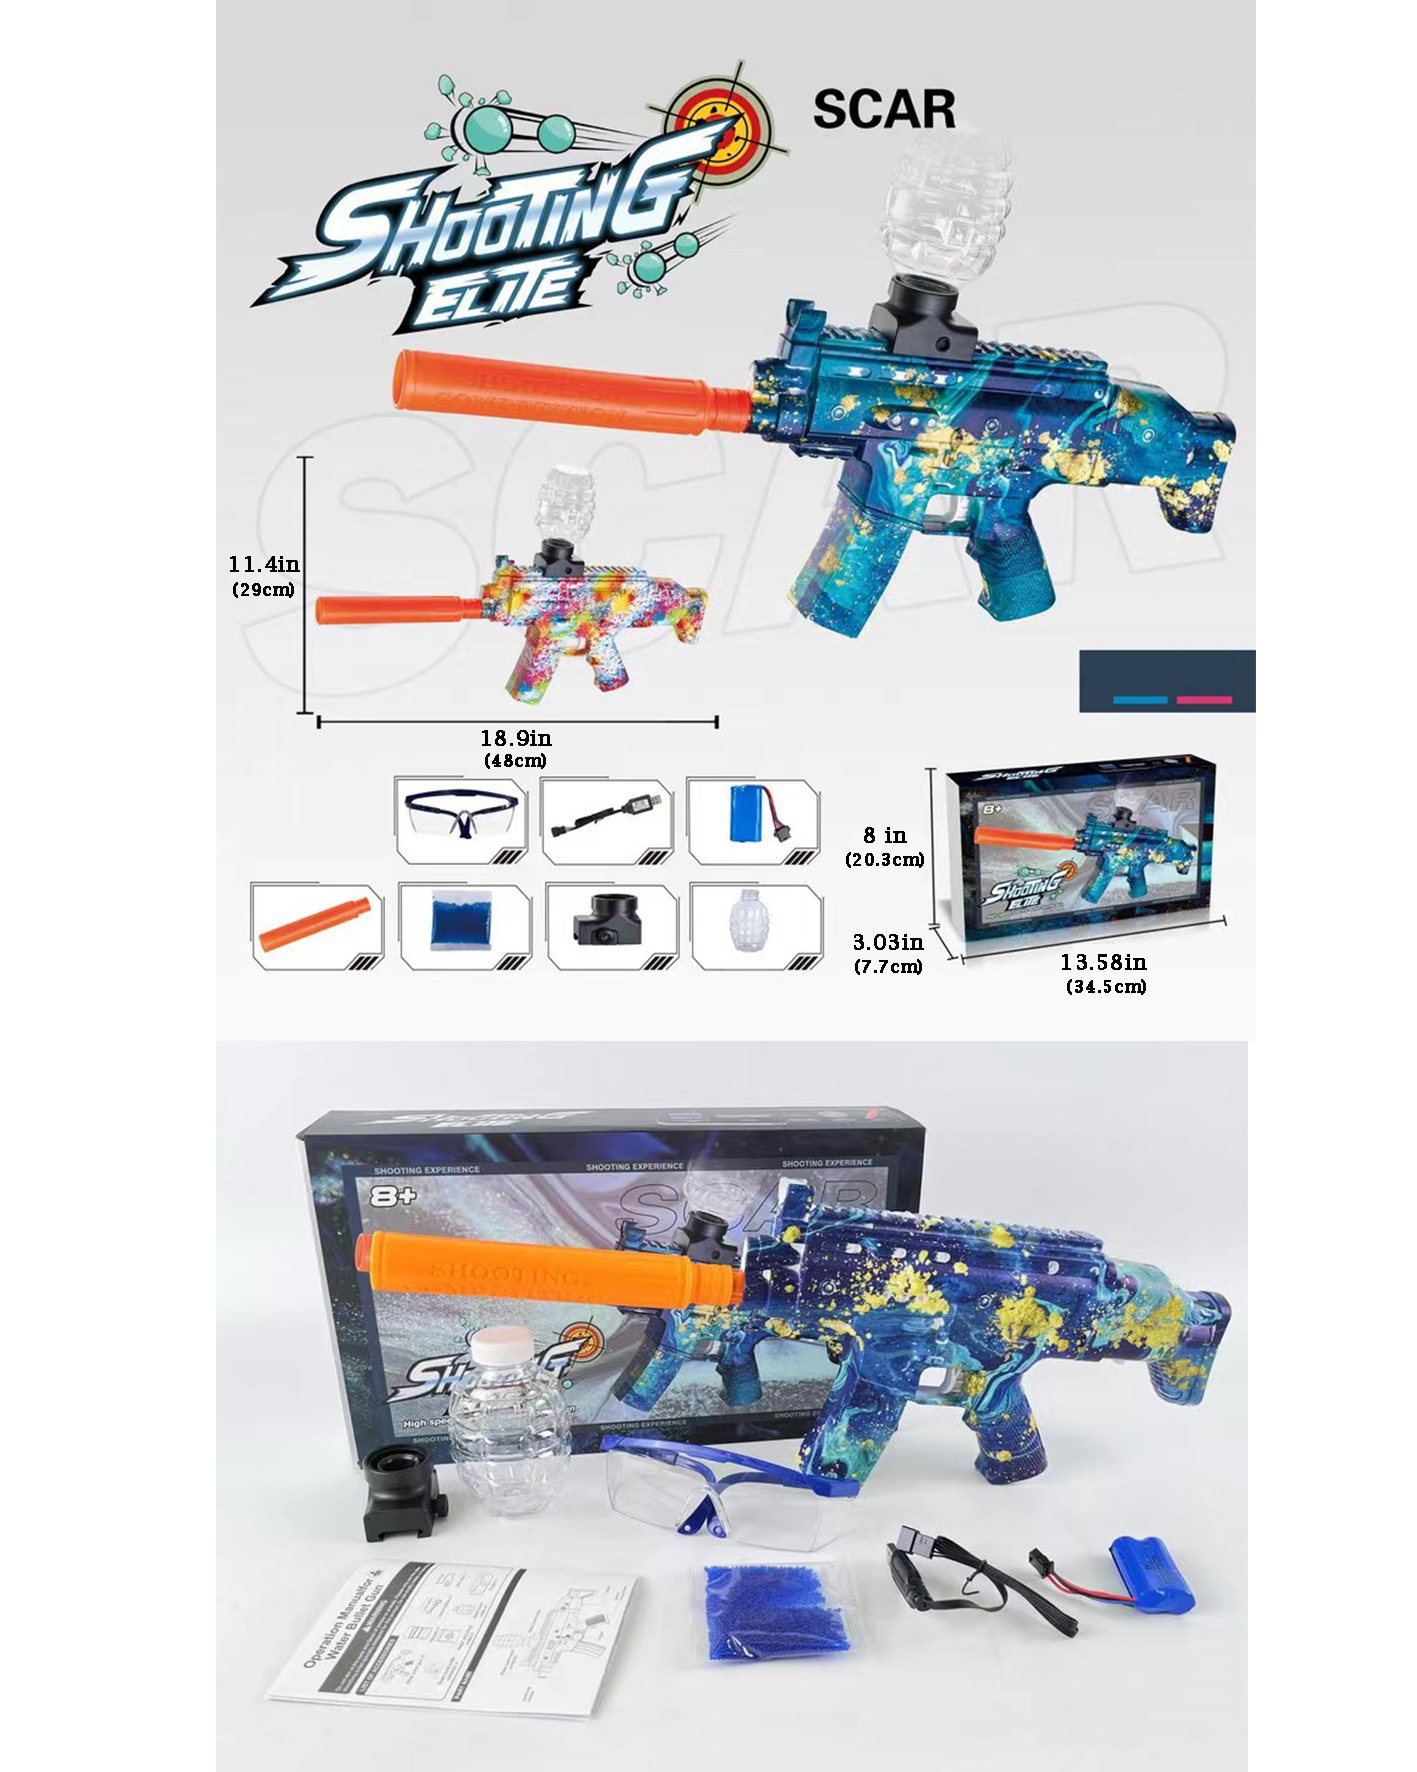 Automatic Gel Blaster Toys | Splatter With 20k+ Bullet And Goggles, Team Game, Ages 12+, Fancy Coating